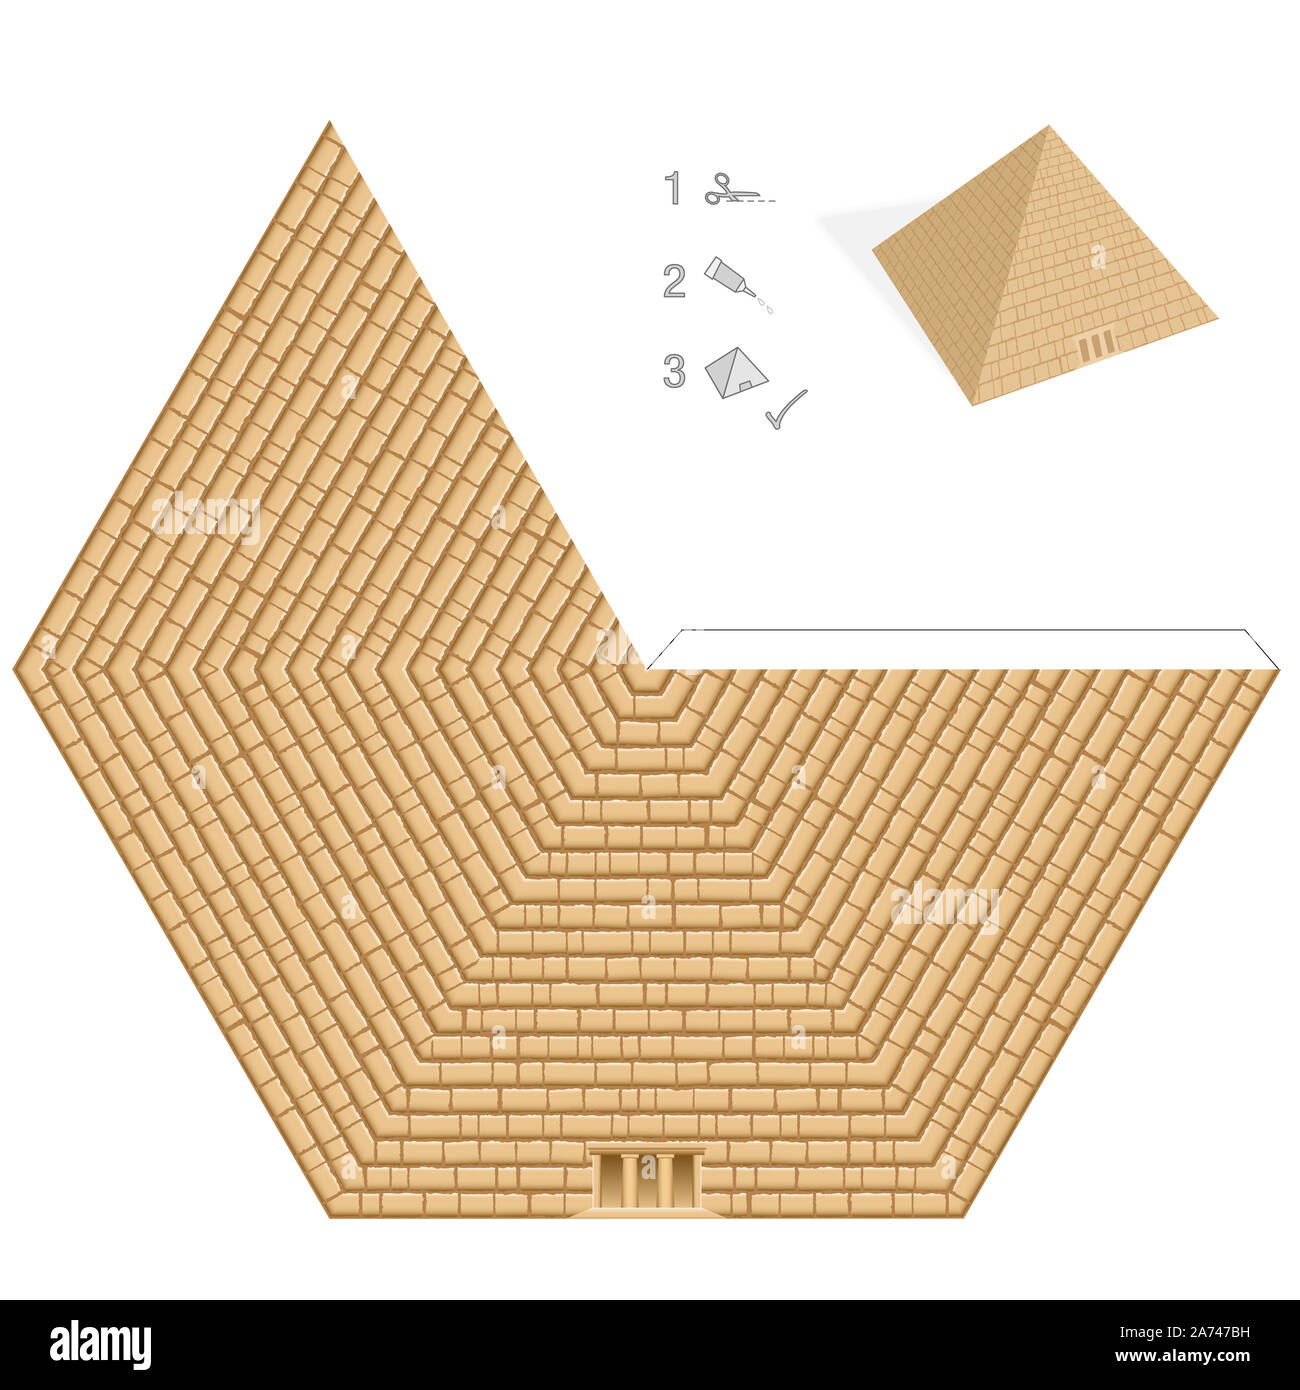 Pyramid paper model Easy template historical egyptian 3D paper art